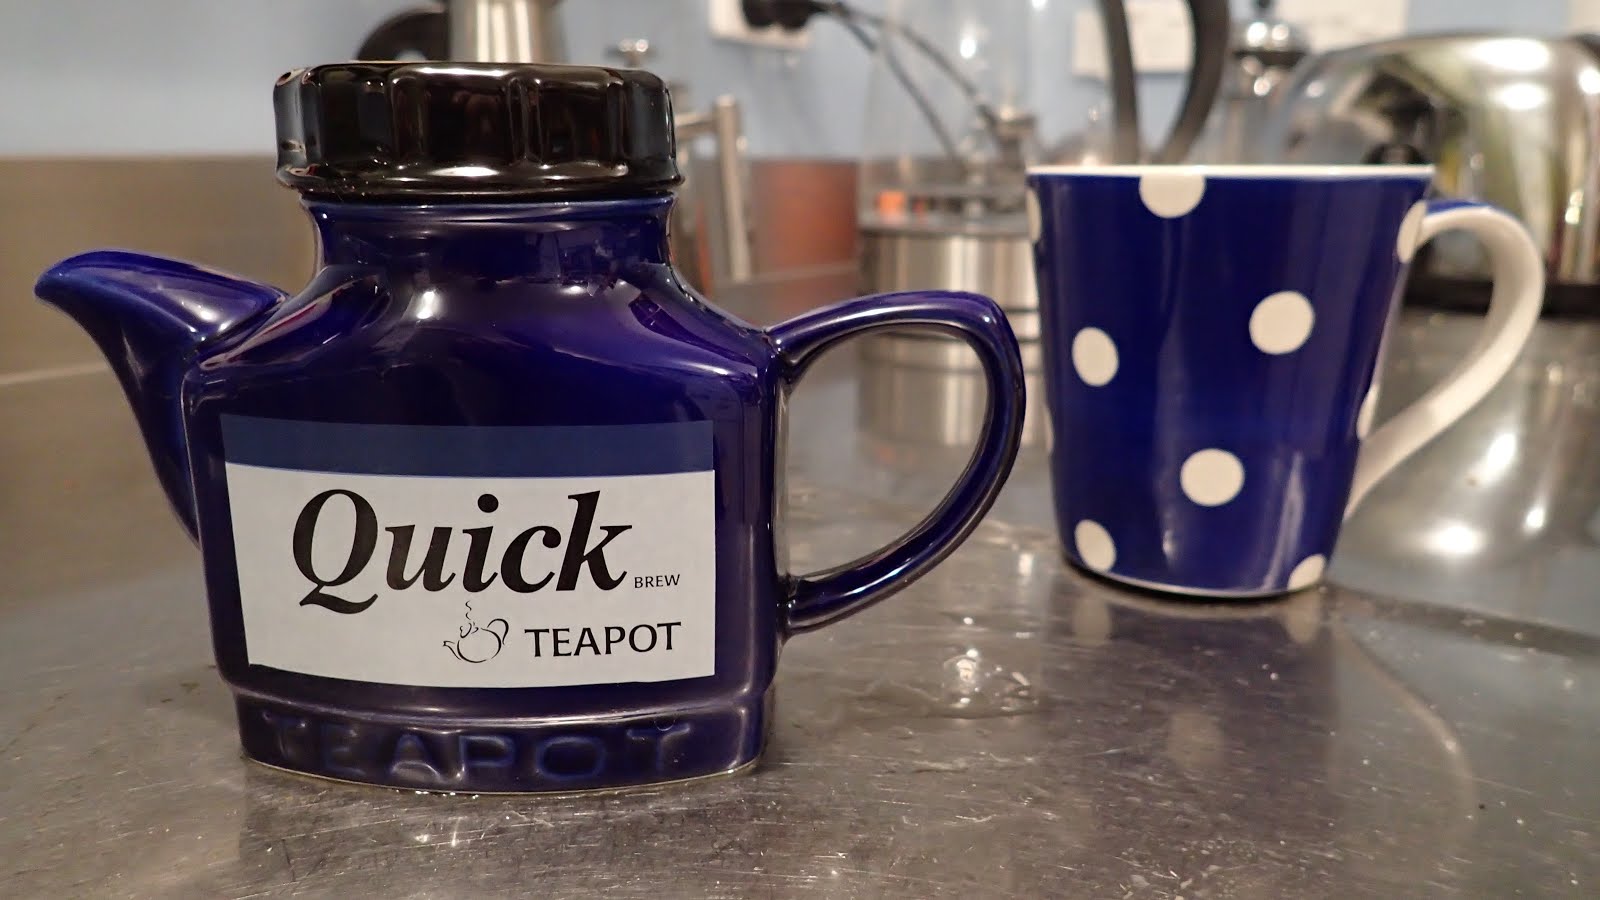 The one cup teapot from the Lake District